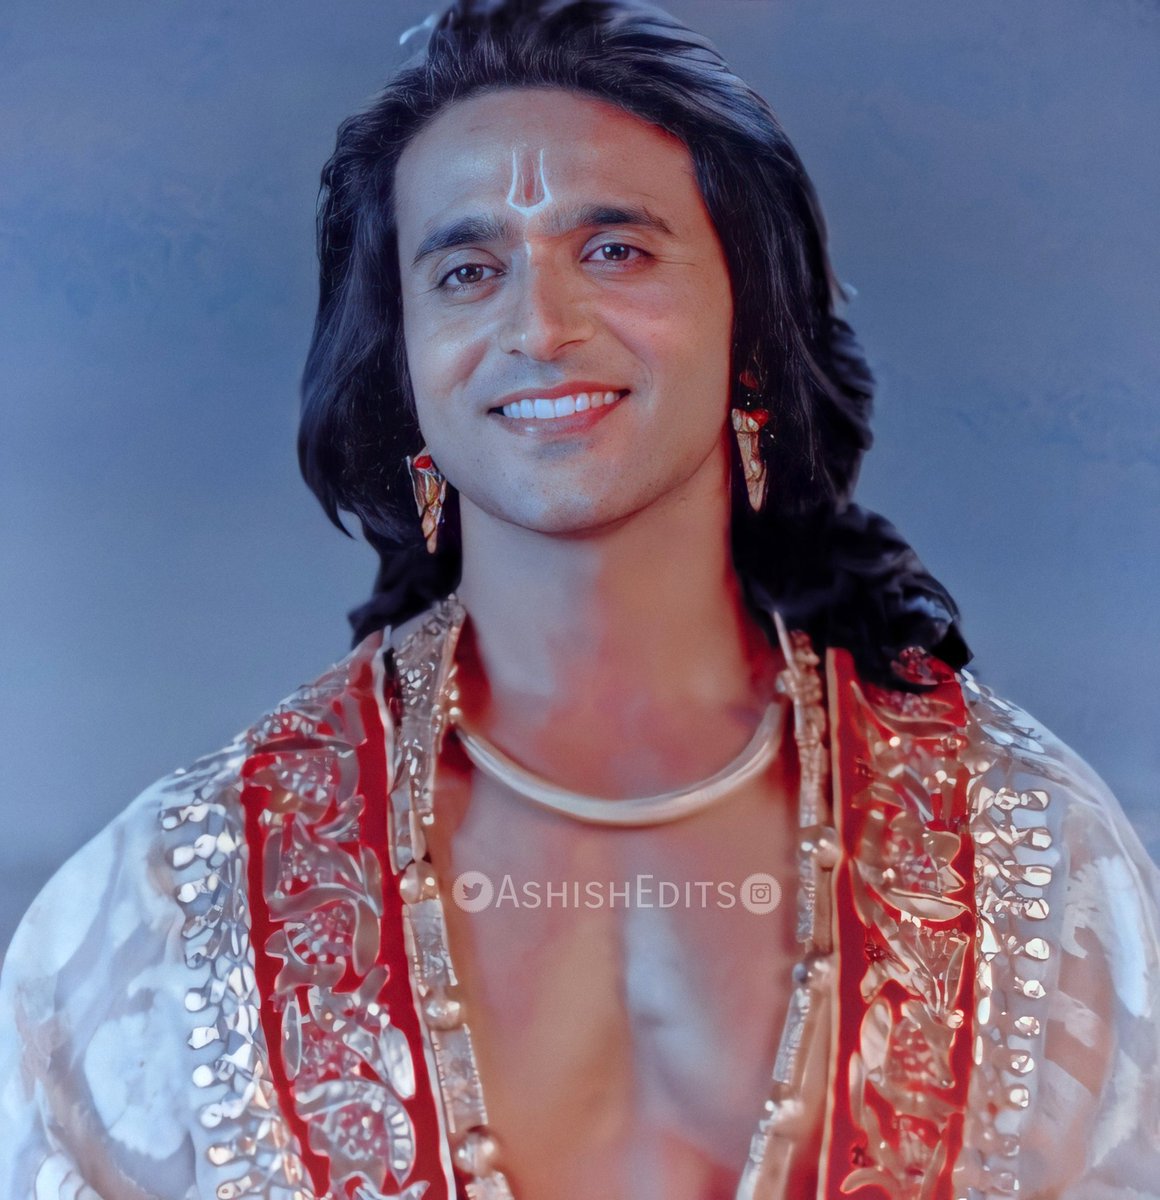 Next watched  #GkD, #JDJ7  #RSSI, Ranveer,also Ram made me a complete Ashishian and started following everything about you ,since then trying my best to support you and by time realized how amazing as person you are as well as an actor(8/10)  @ashish30sharma  #10YearsOfAshishSharma